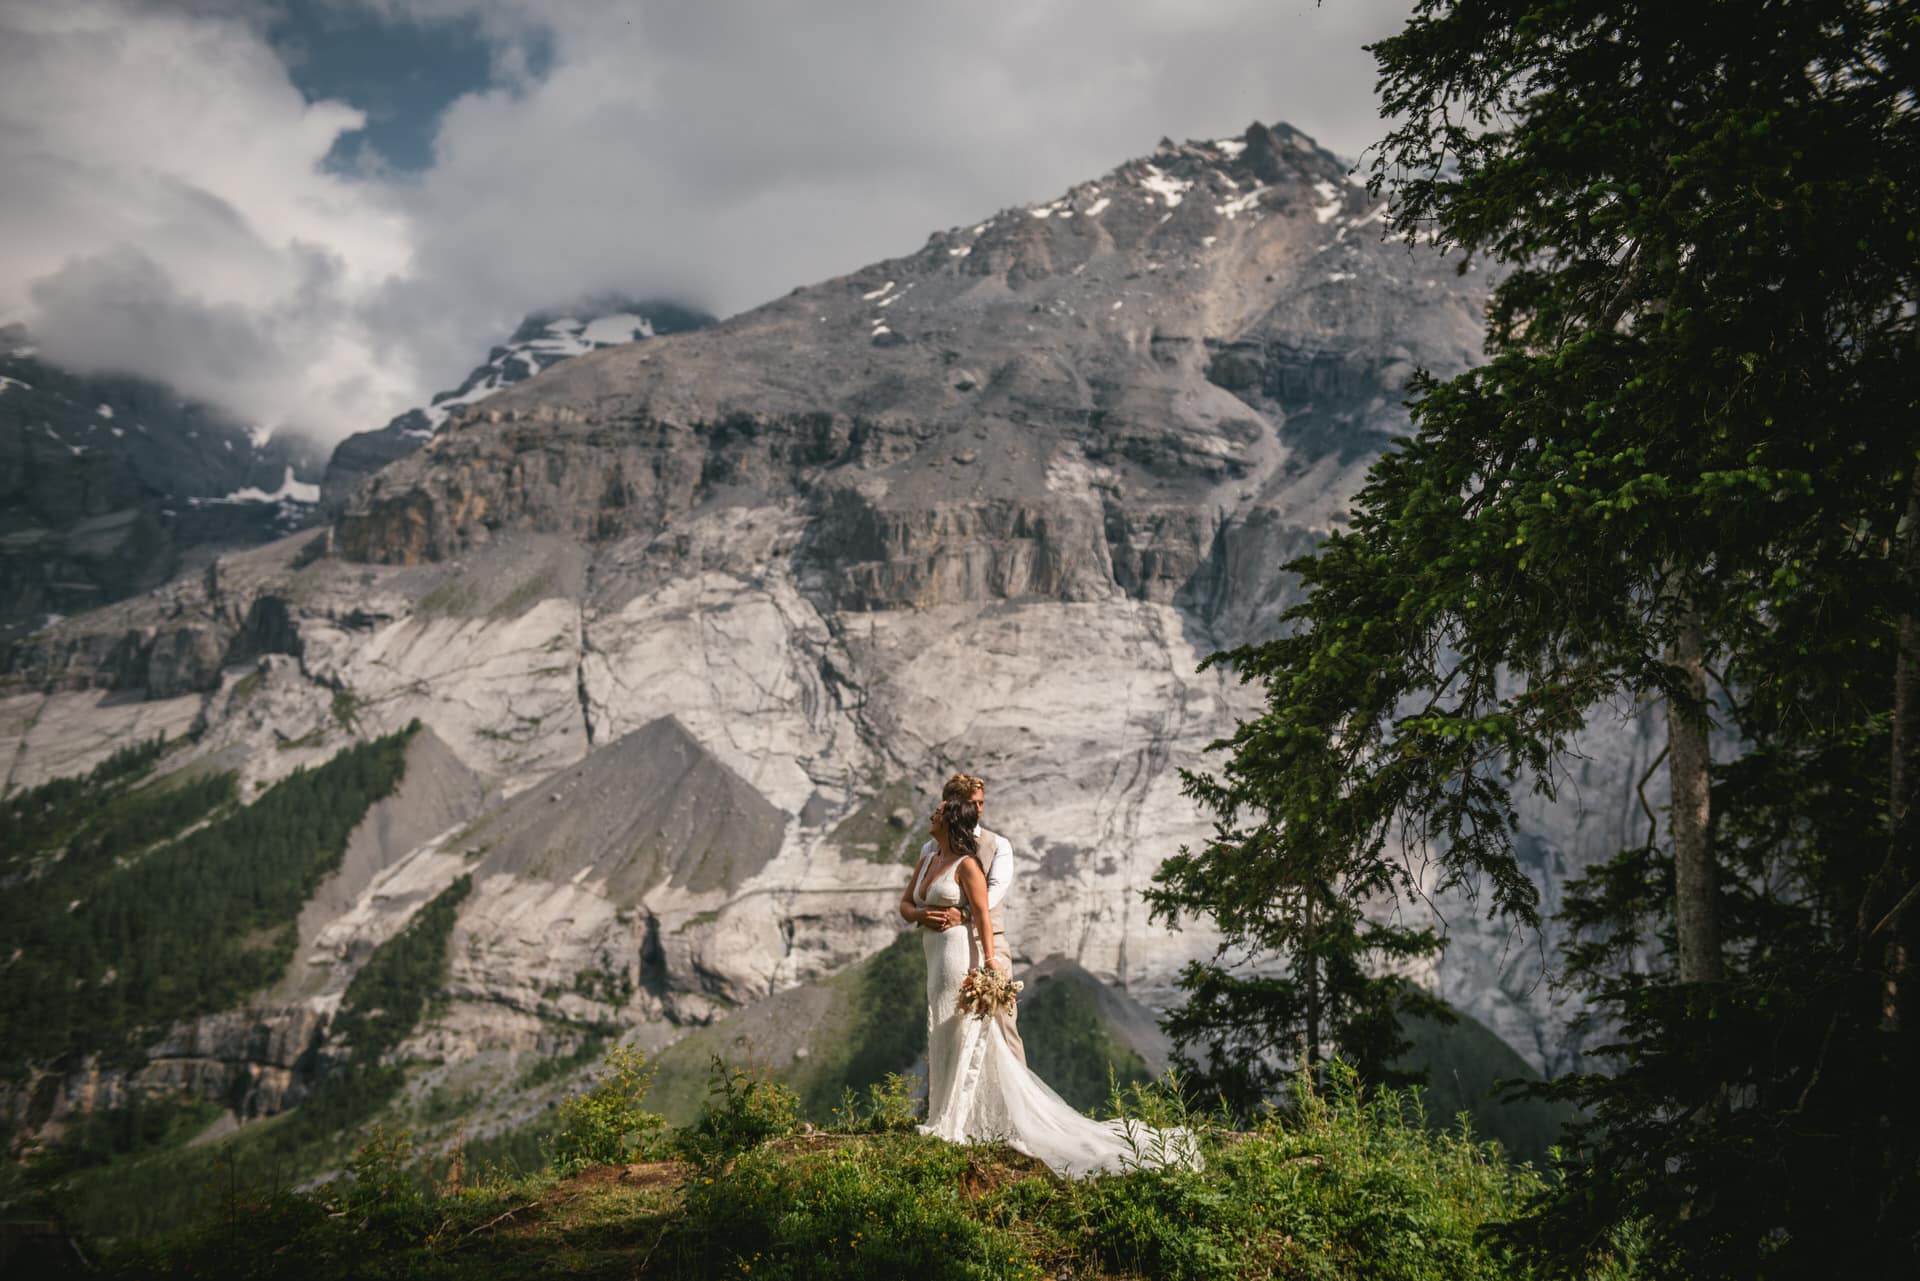 Love's journey framed by Swiss vistas - a mesmerizing hiking elopement.